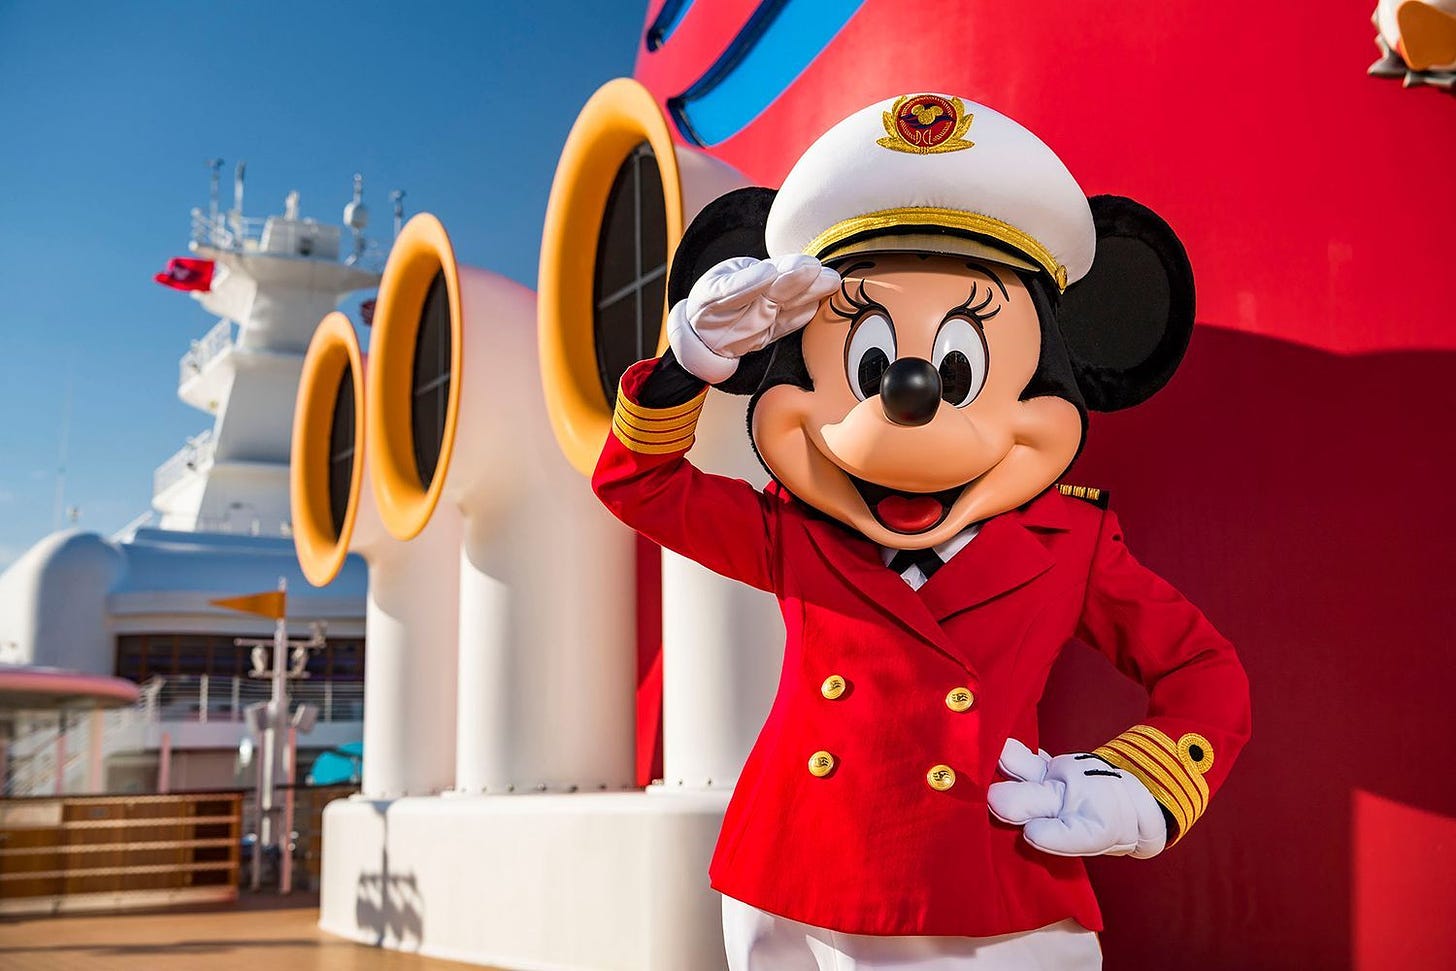 Oh boy! The Disney Wonder cruise ship is coming to Australia - Travel News  - delicious.com.au